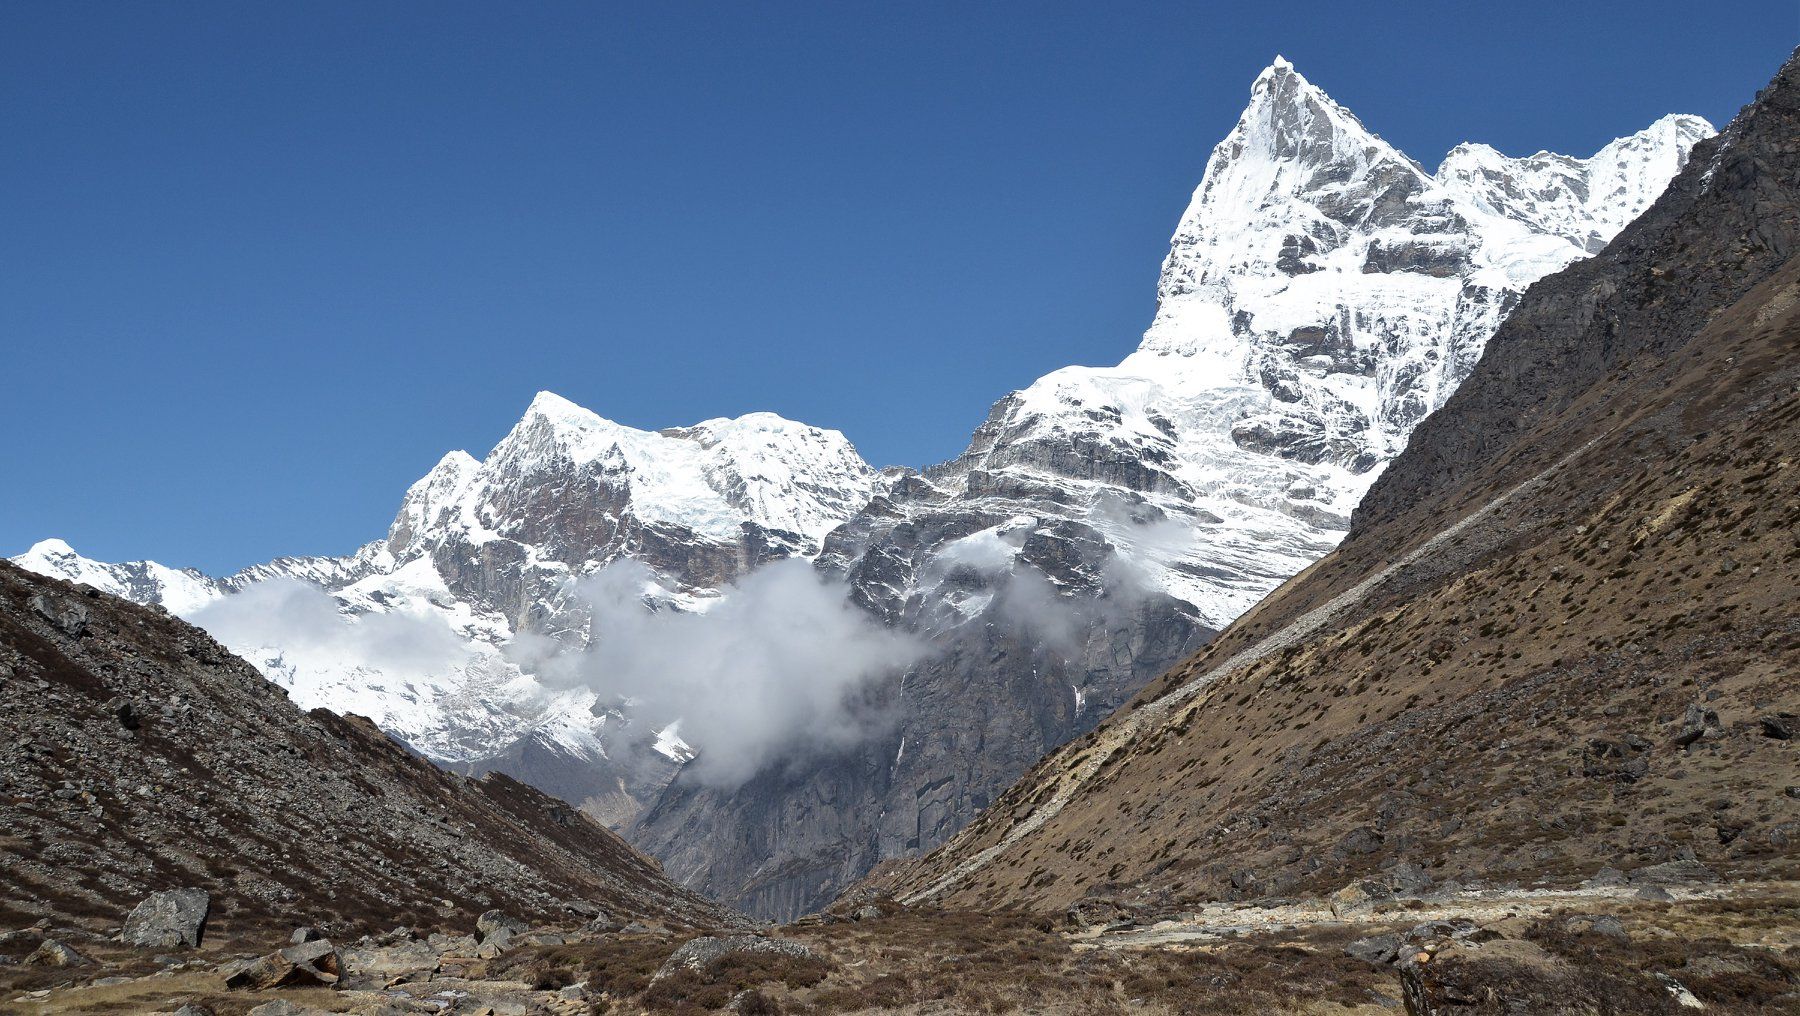 Malangphulang Group of 6000m Peaks from Dig Kare on ascent from Hinku Valley to Mera La